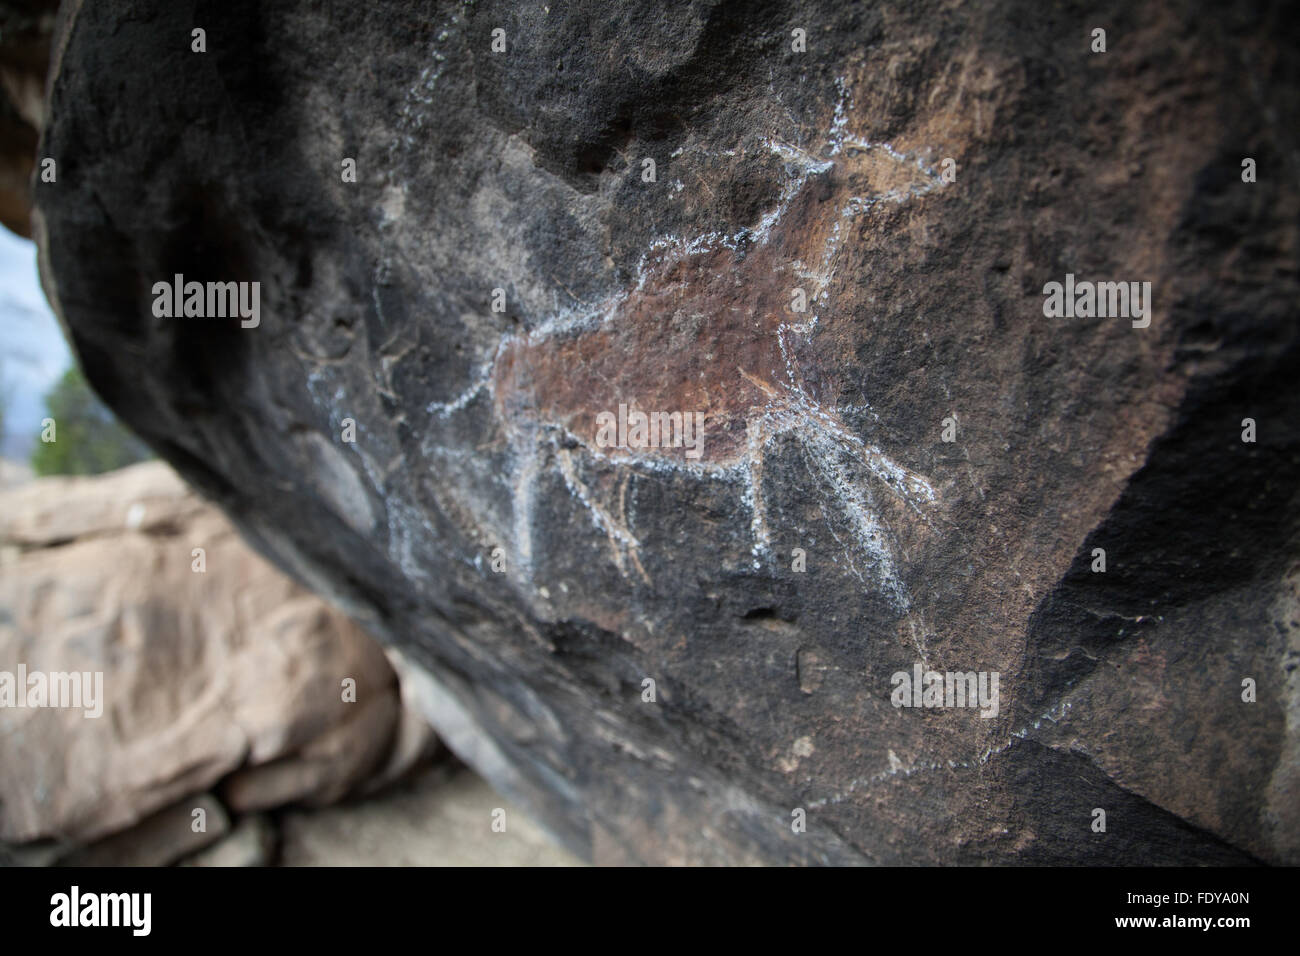 Ancient African eland rock art found on the walls of a overhang in Quthing, Lesotho, Africa Stock Photo